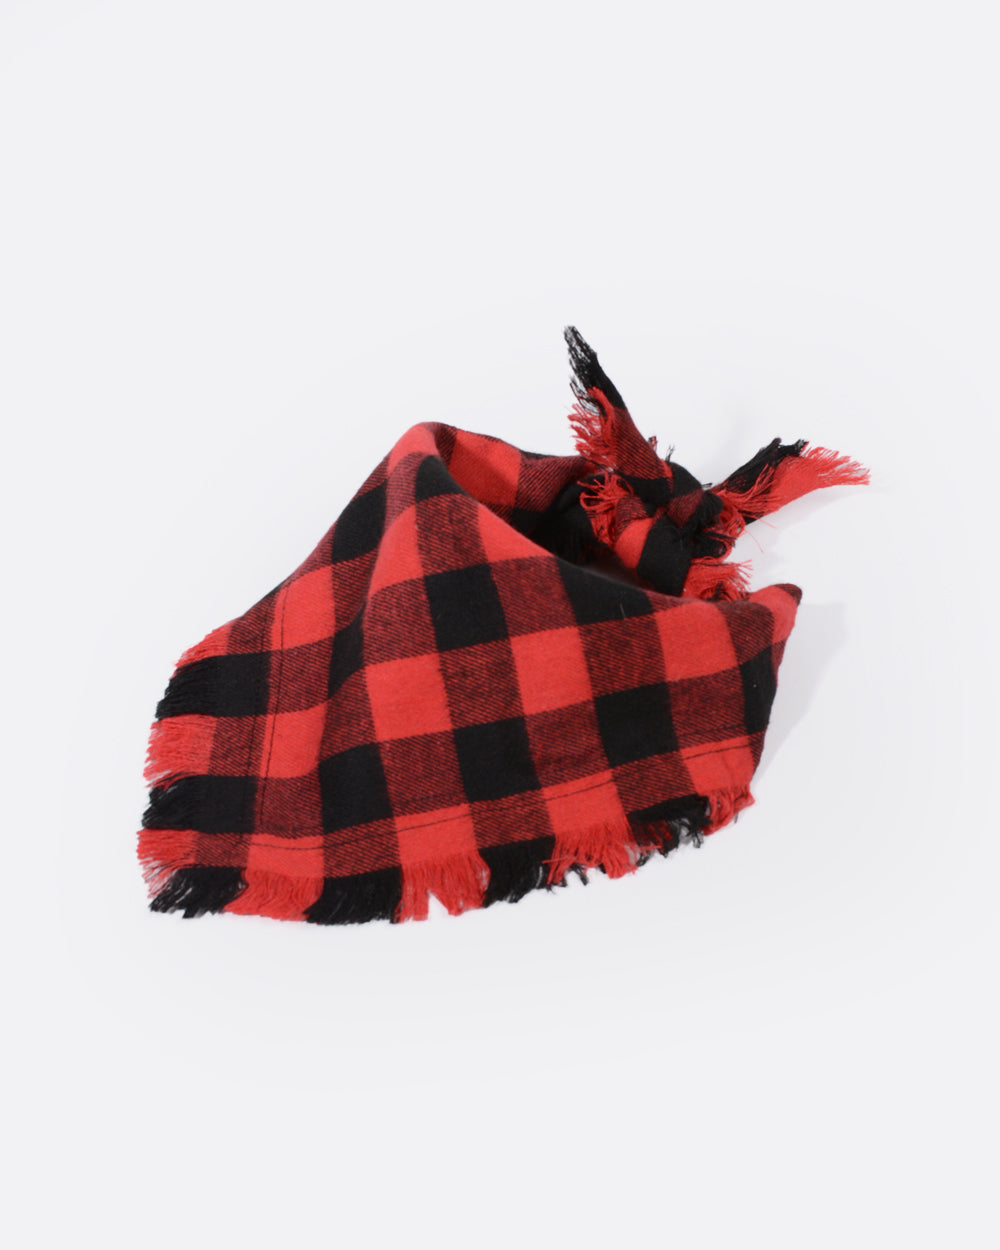 This lightweight triangle dog scarf is made of high-quality pure cotton material. 100% safe and durable in performance. Features a classic tassel edging and Christmas red grid, A cool costume accessory for dogs' Christmas dressing.